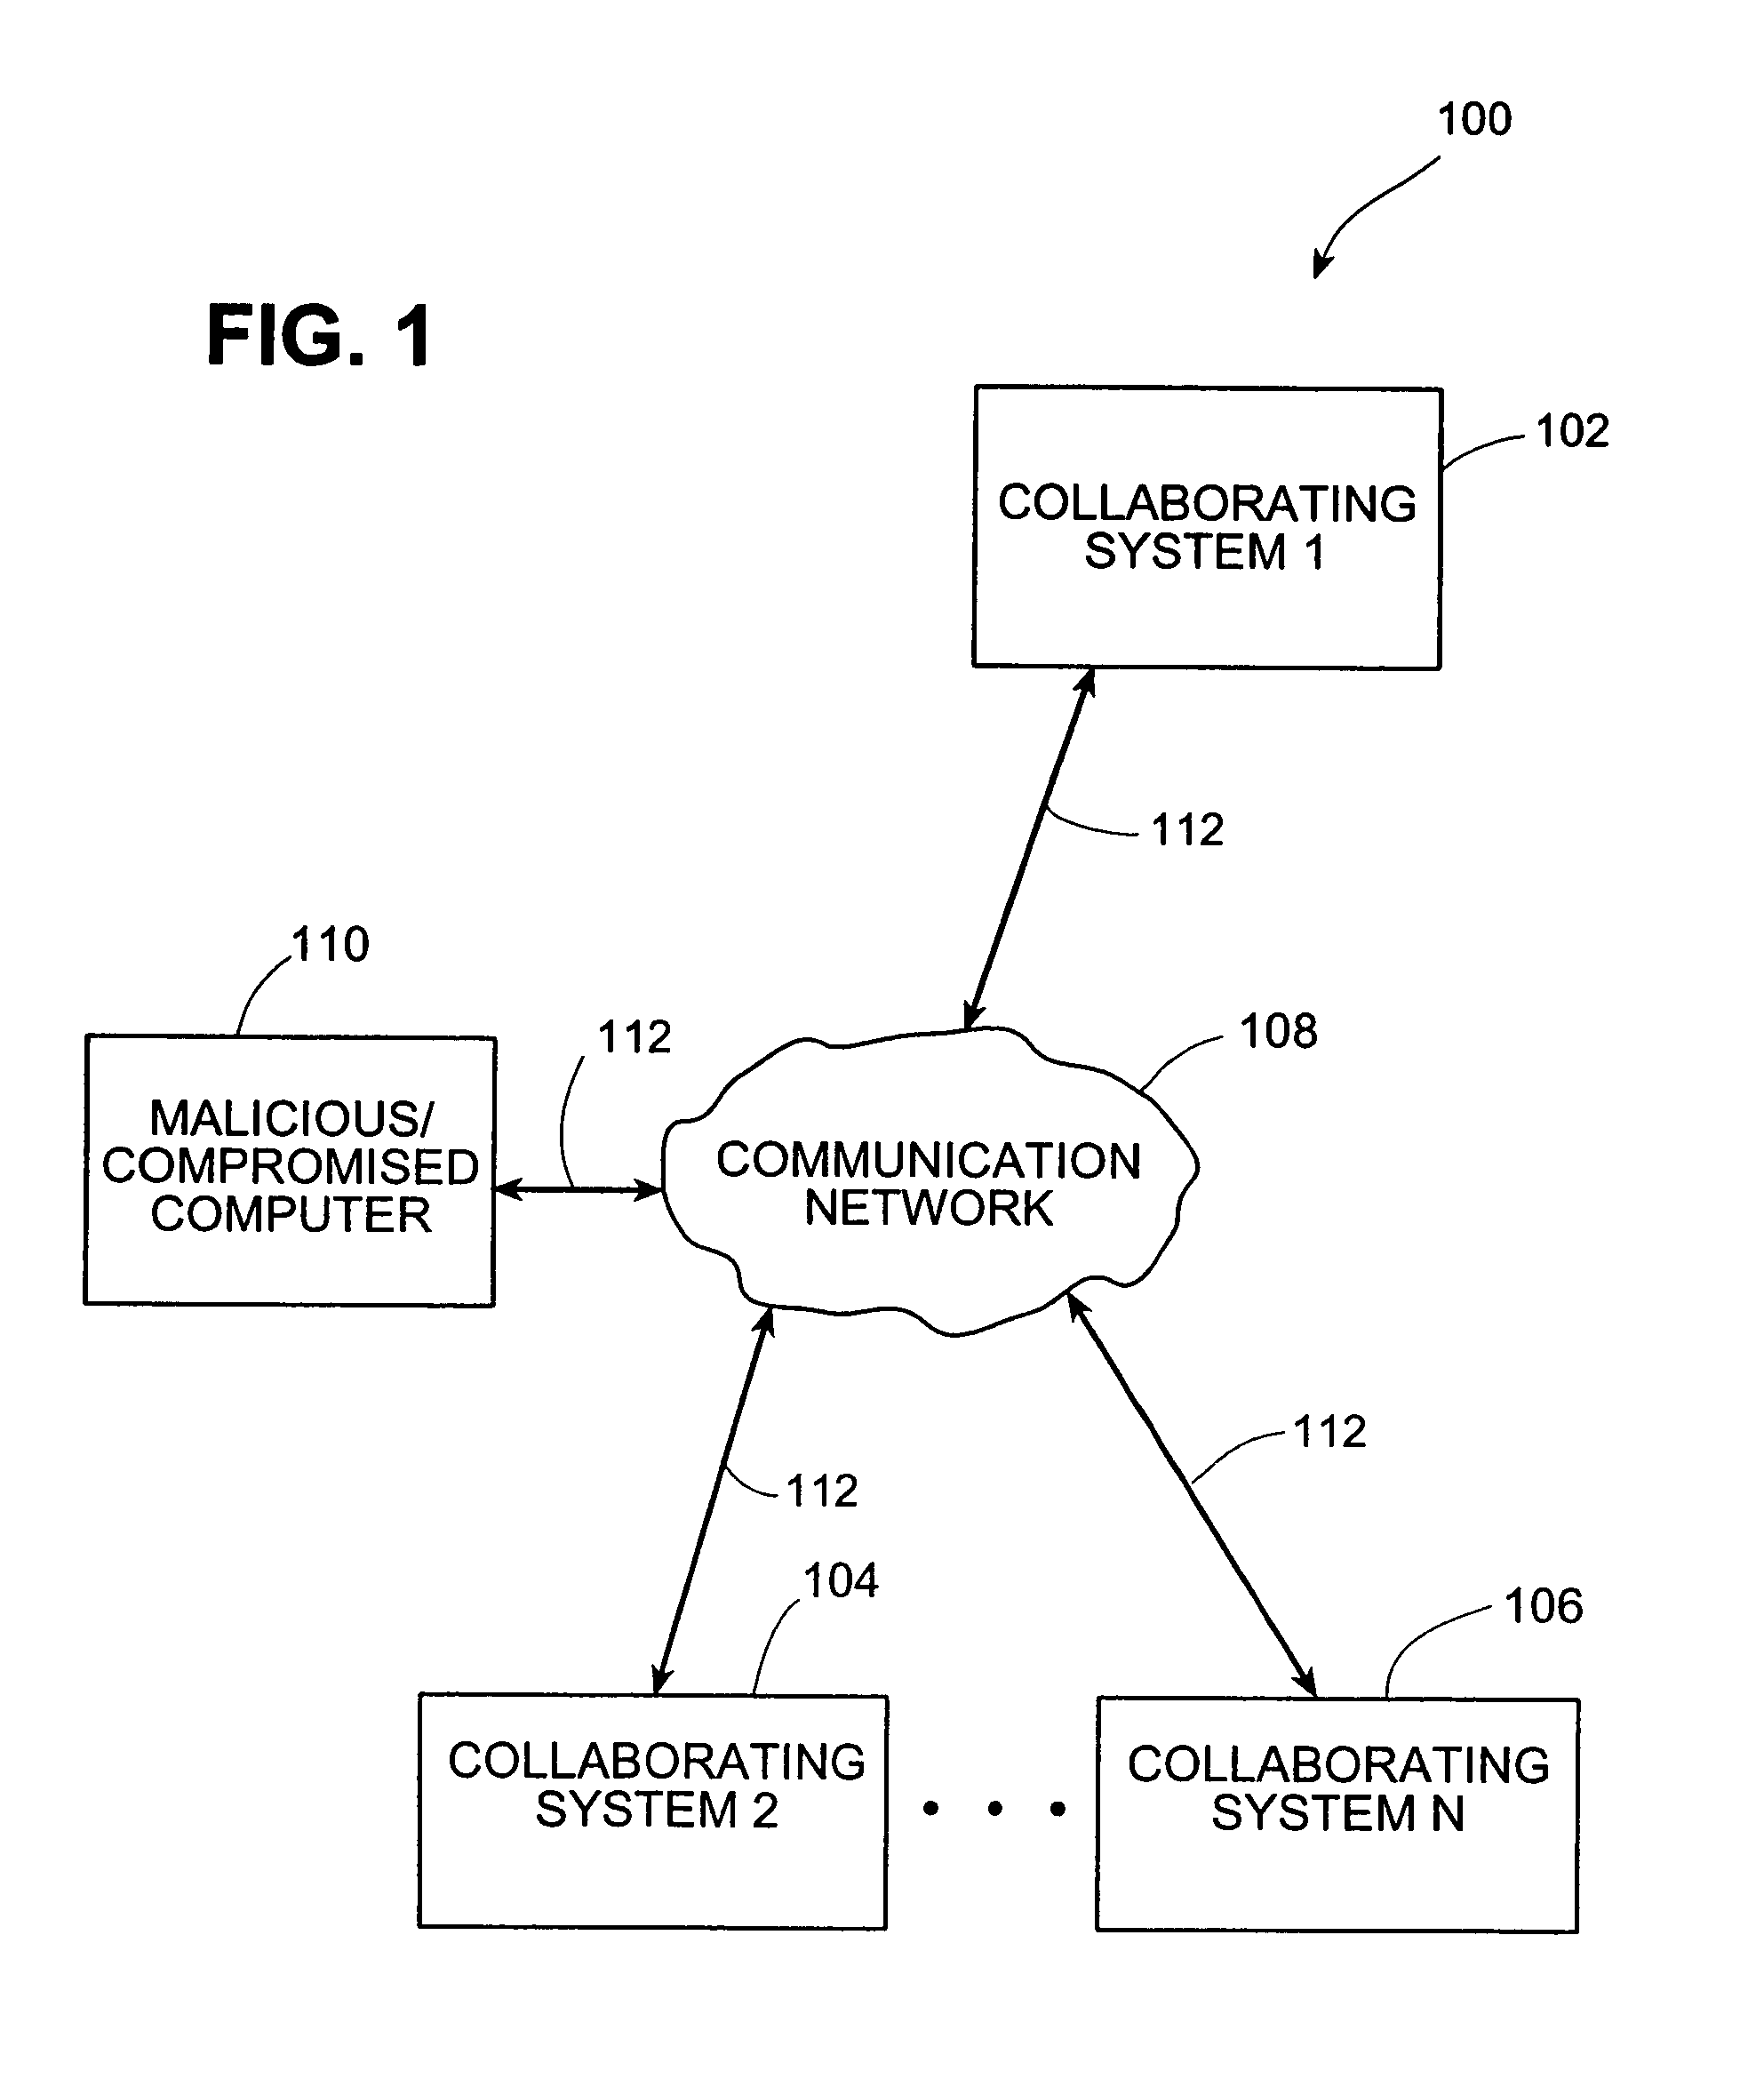 Systems and methods for correlating and distributing intrusion alert information among collaborating computer systems